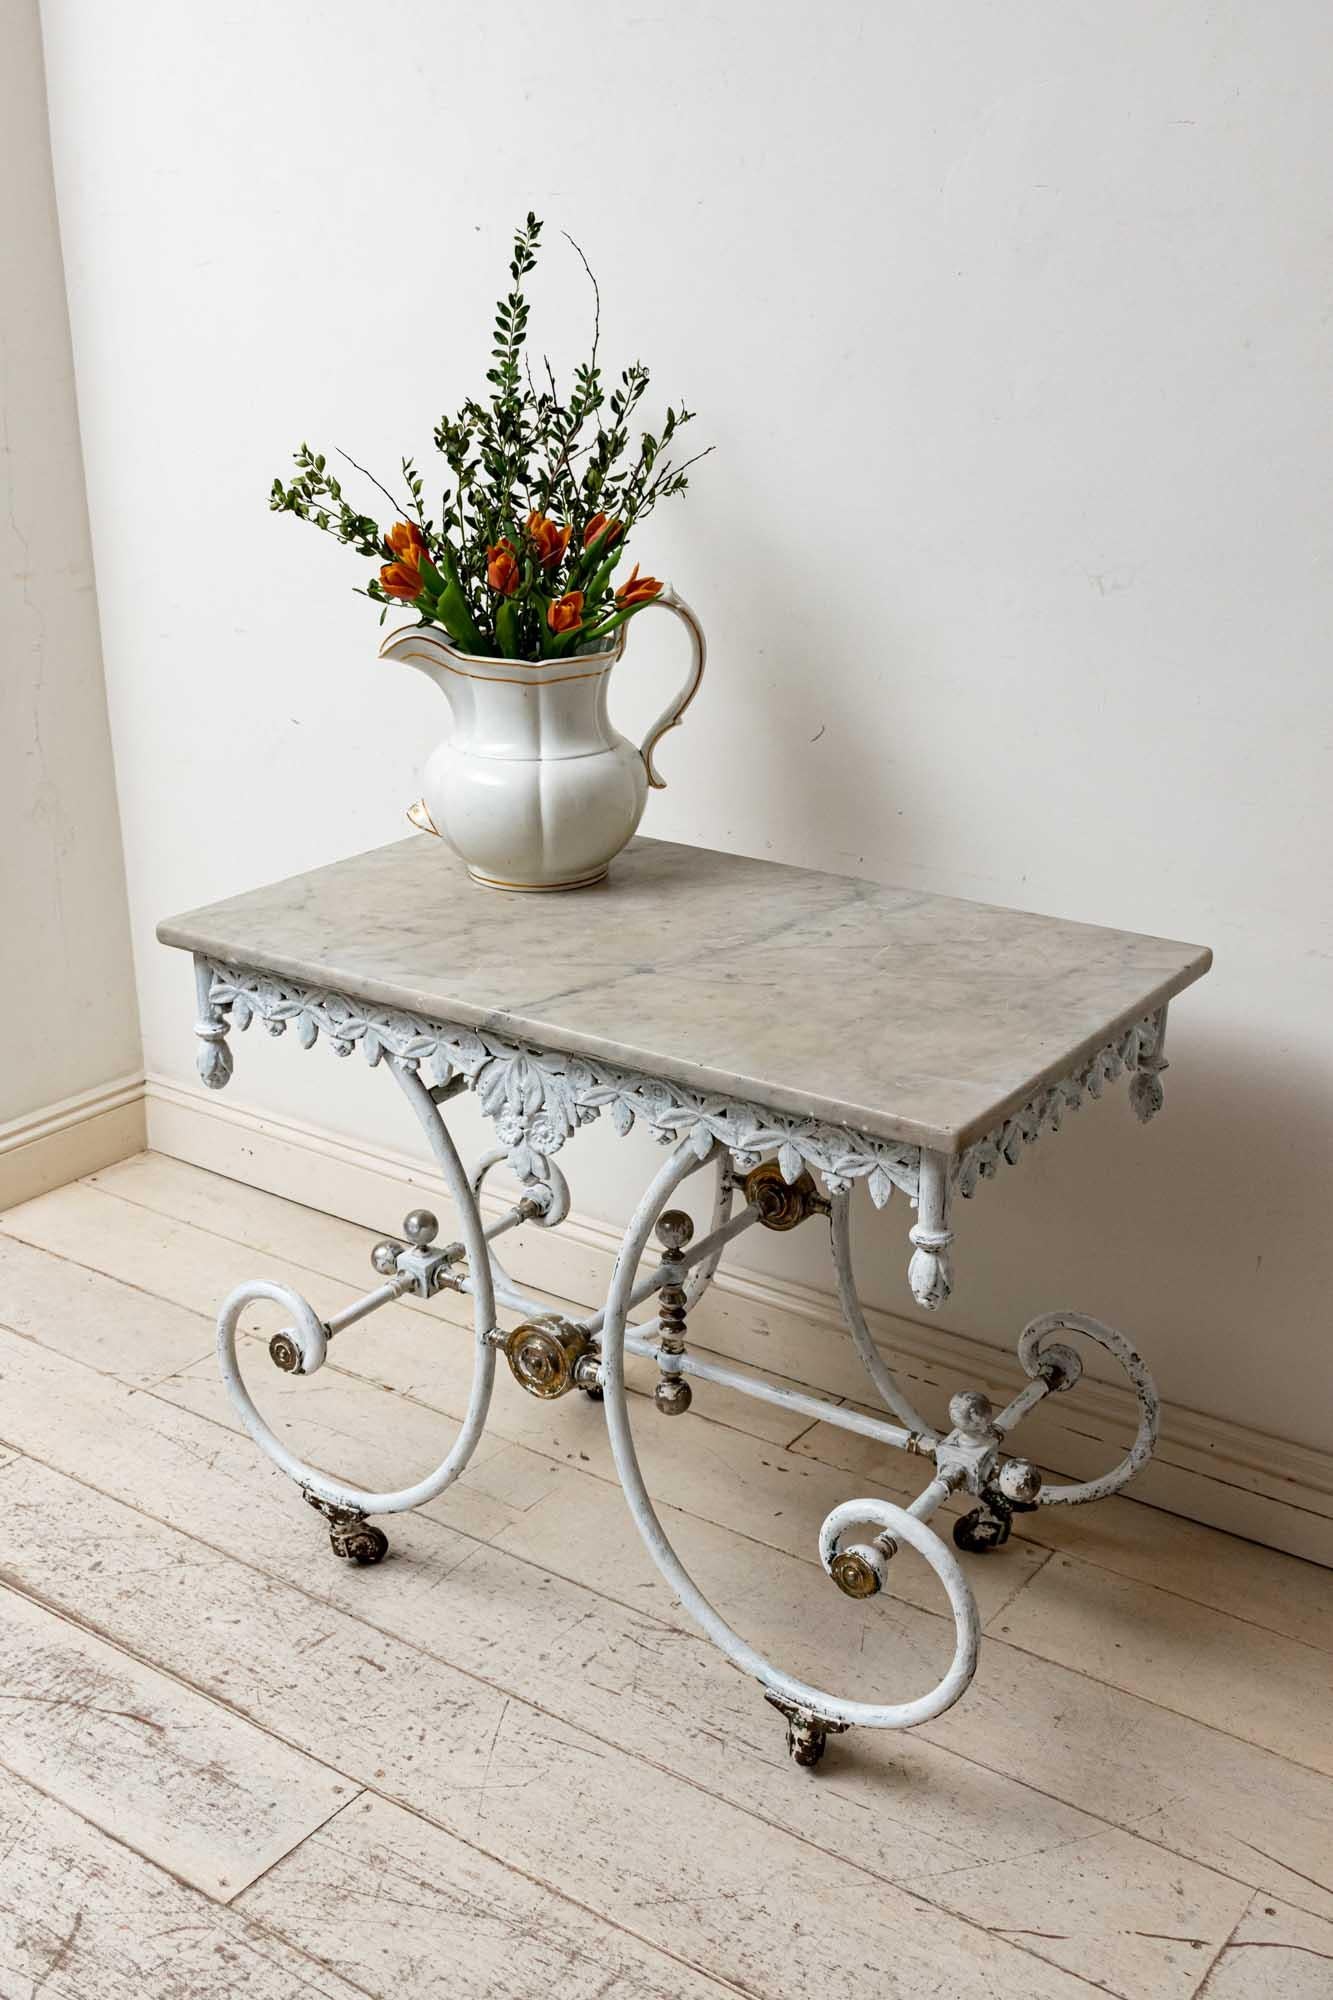 19th century French cast iron decorative patisserie table with the original marble top. The table features an unusual decorative frieze of leaves with a scrolled base, brass finials and medallions. The paint has been caringly refreshed and is